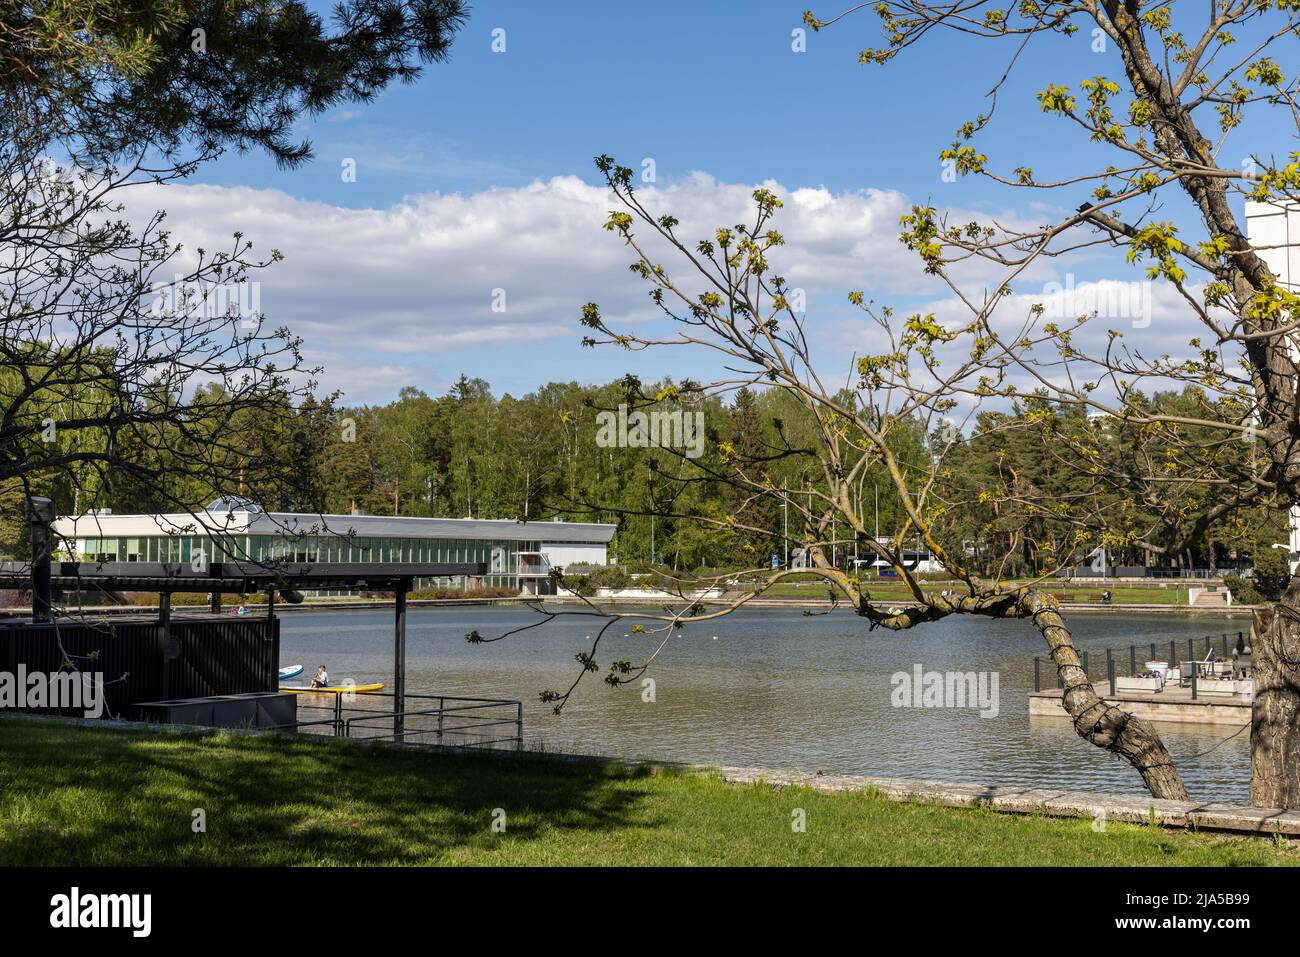 People enjoying water on an artificial bay of water in Espoo Stock Photo